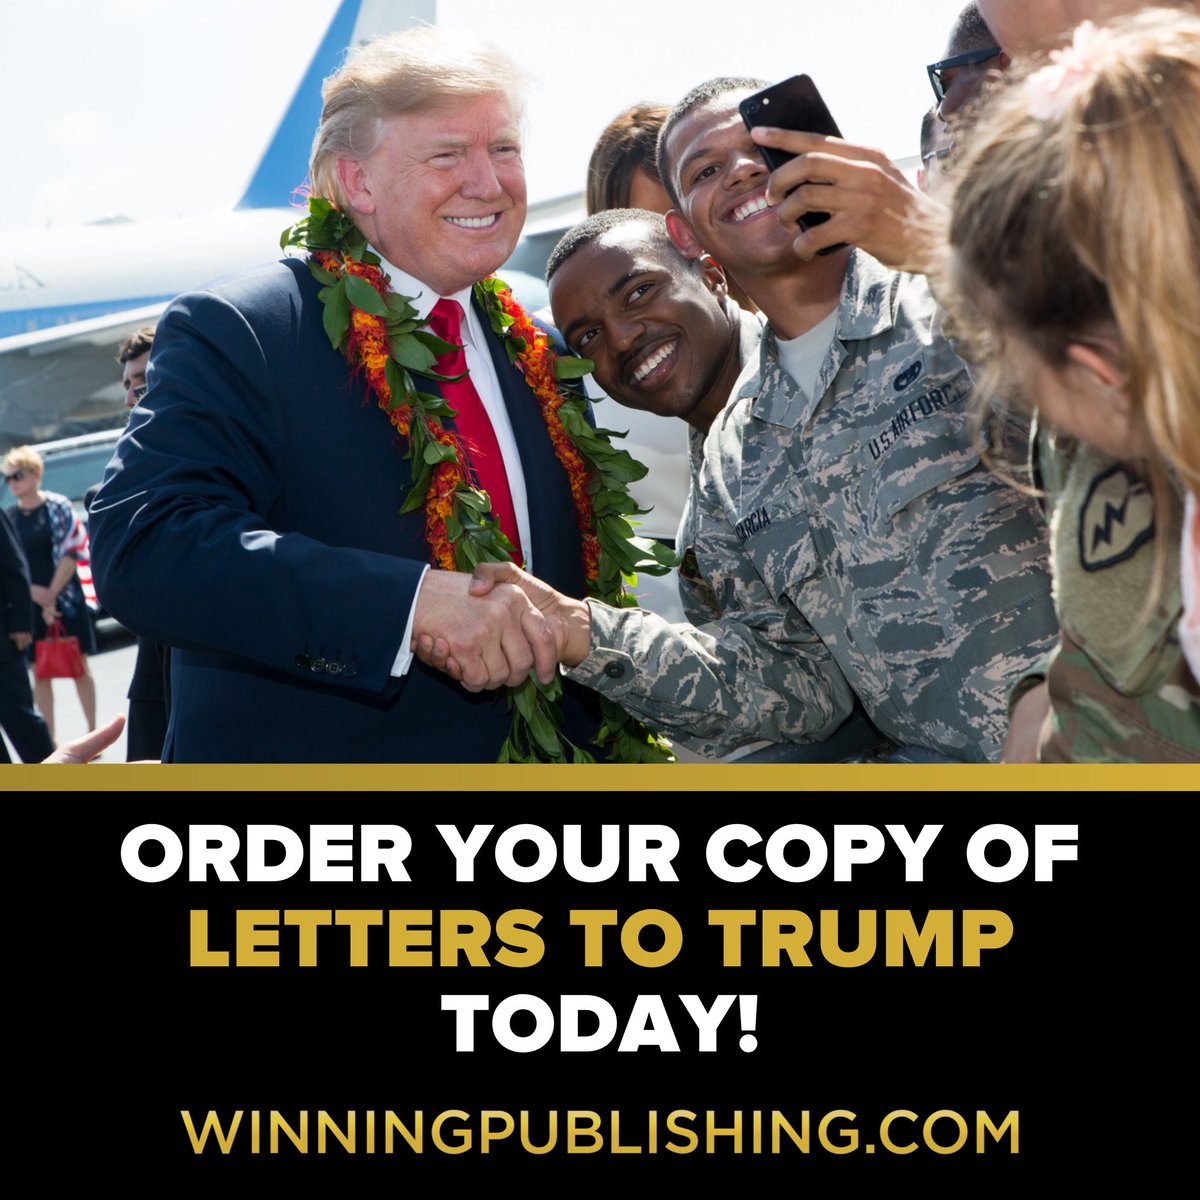 Get your copy today at WINNINGPUBLISHING.com!